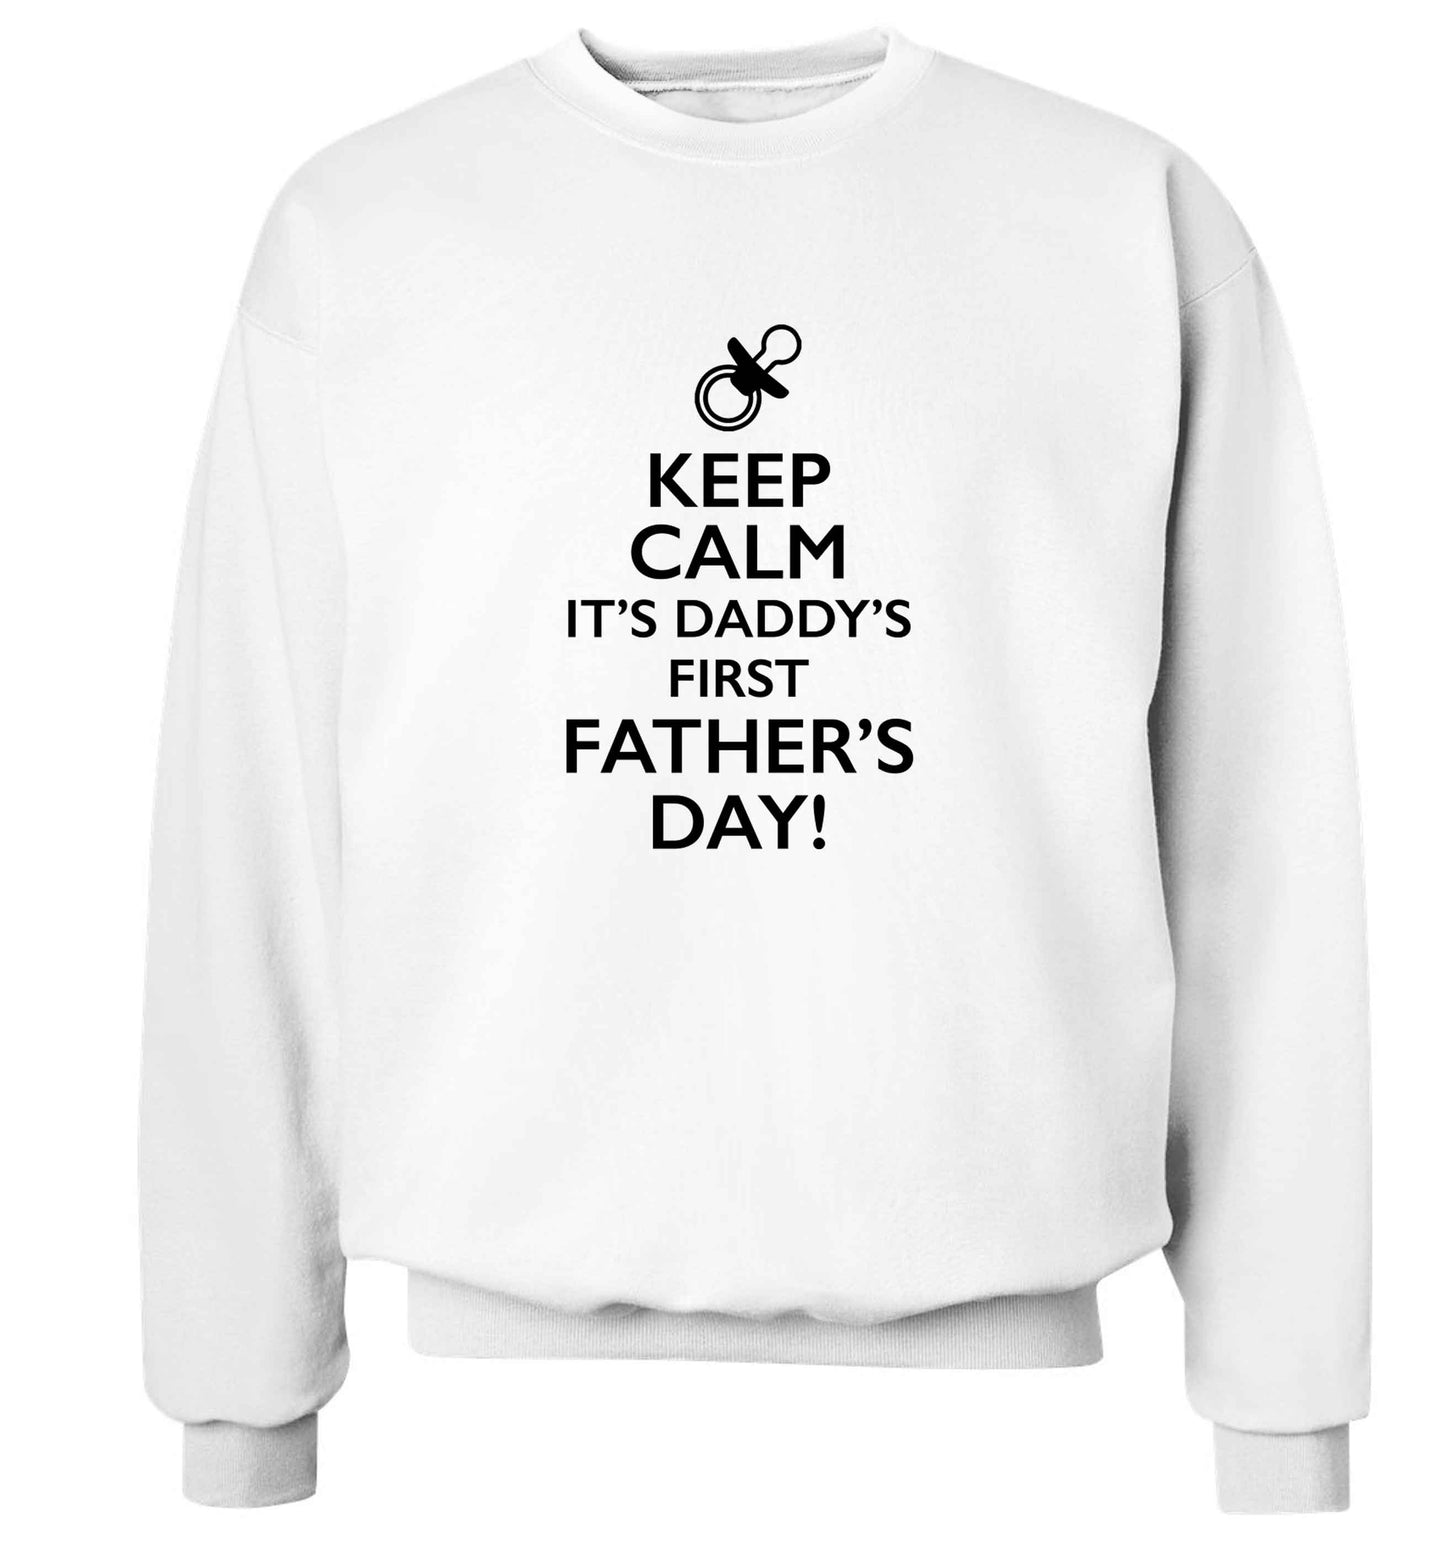 Keep calm it's daddys first father's day adult's unisex white sweater 2XL